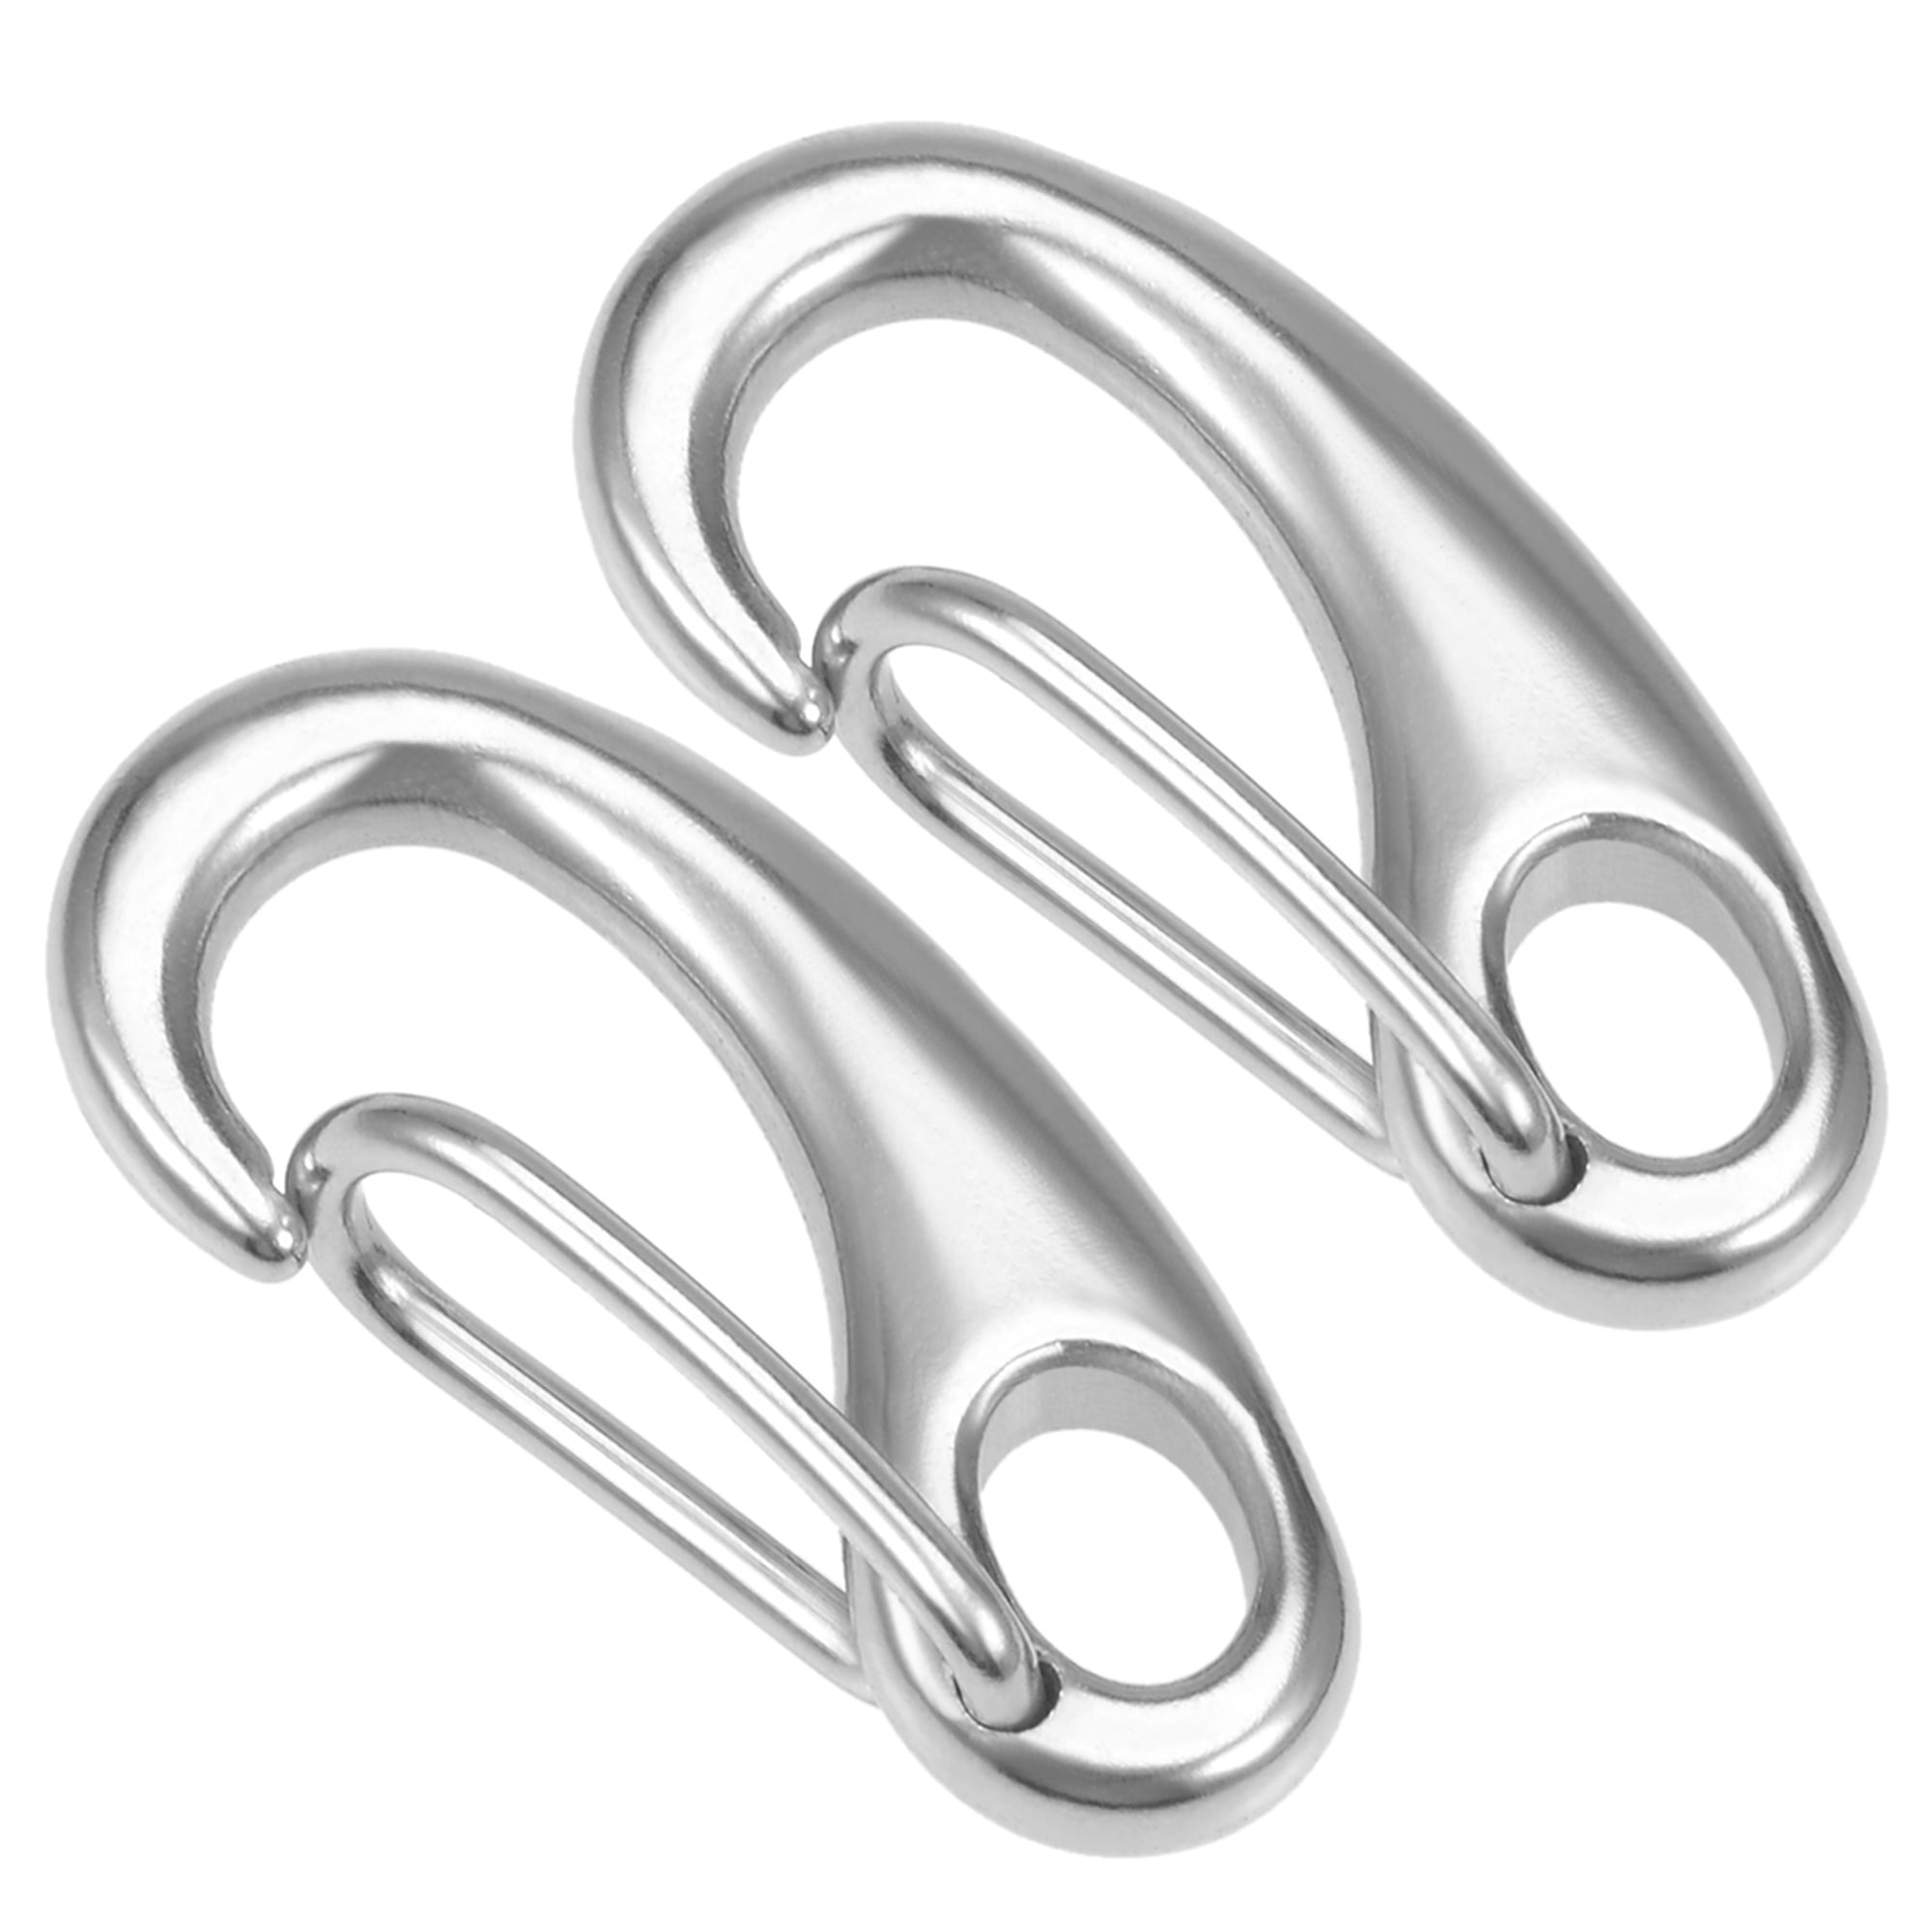 Carabiner snap hook with eyelet 50mm 70mm 316 A4 stainless steel Pack of 2 60mm 